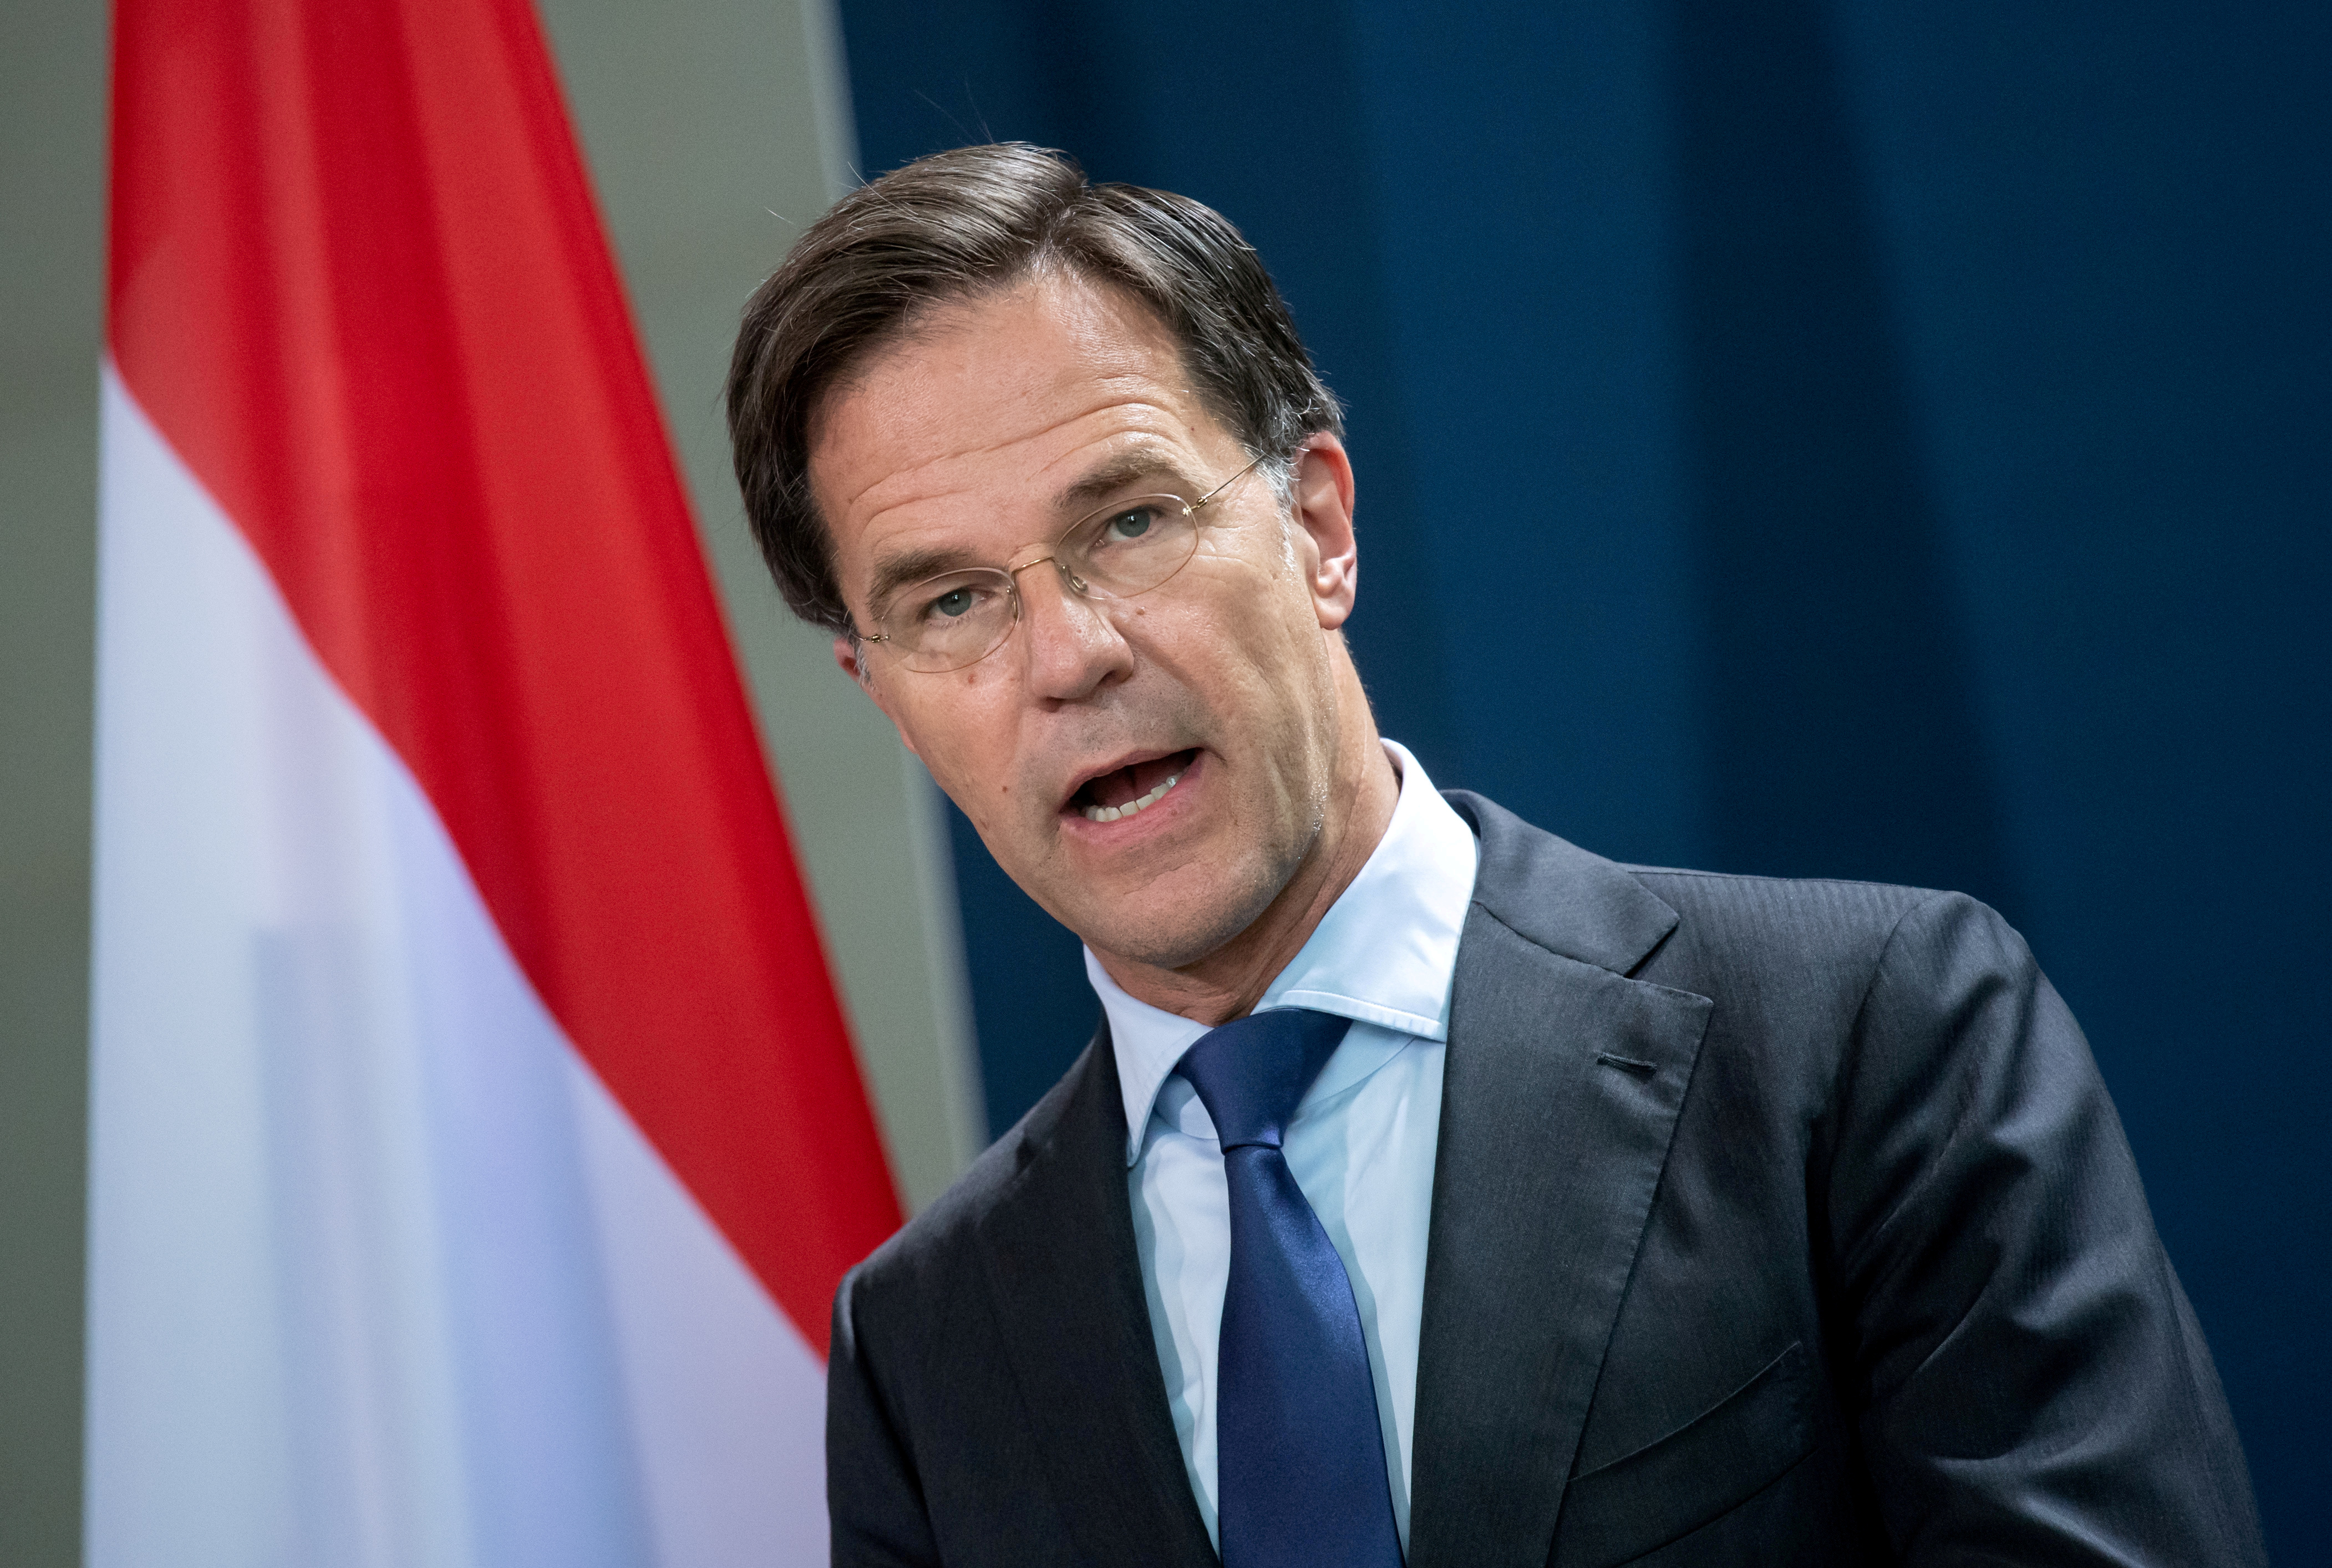 As Final Votes Cast Dutch Pm Rutte Expected To Stay In Office After Pandemic Election Reuters